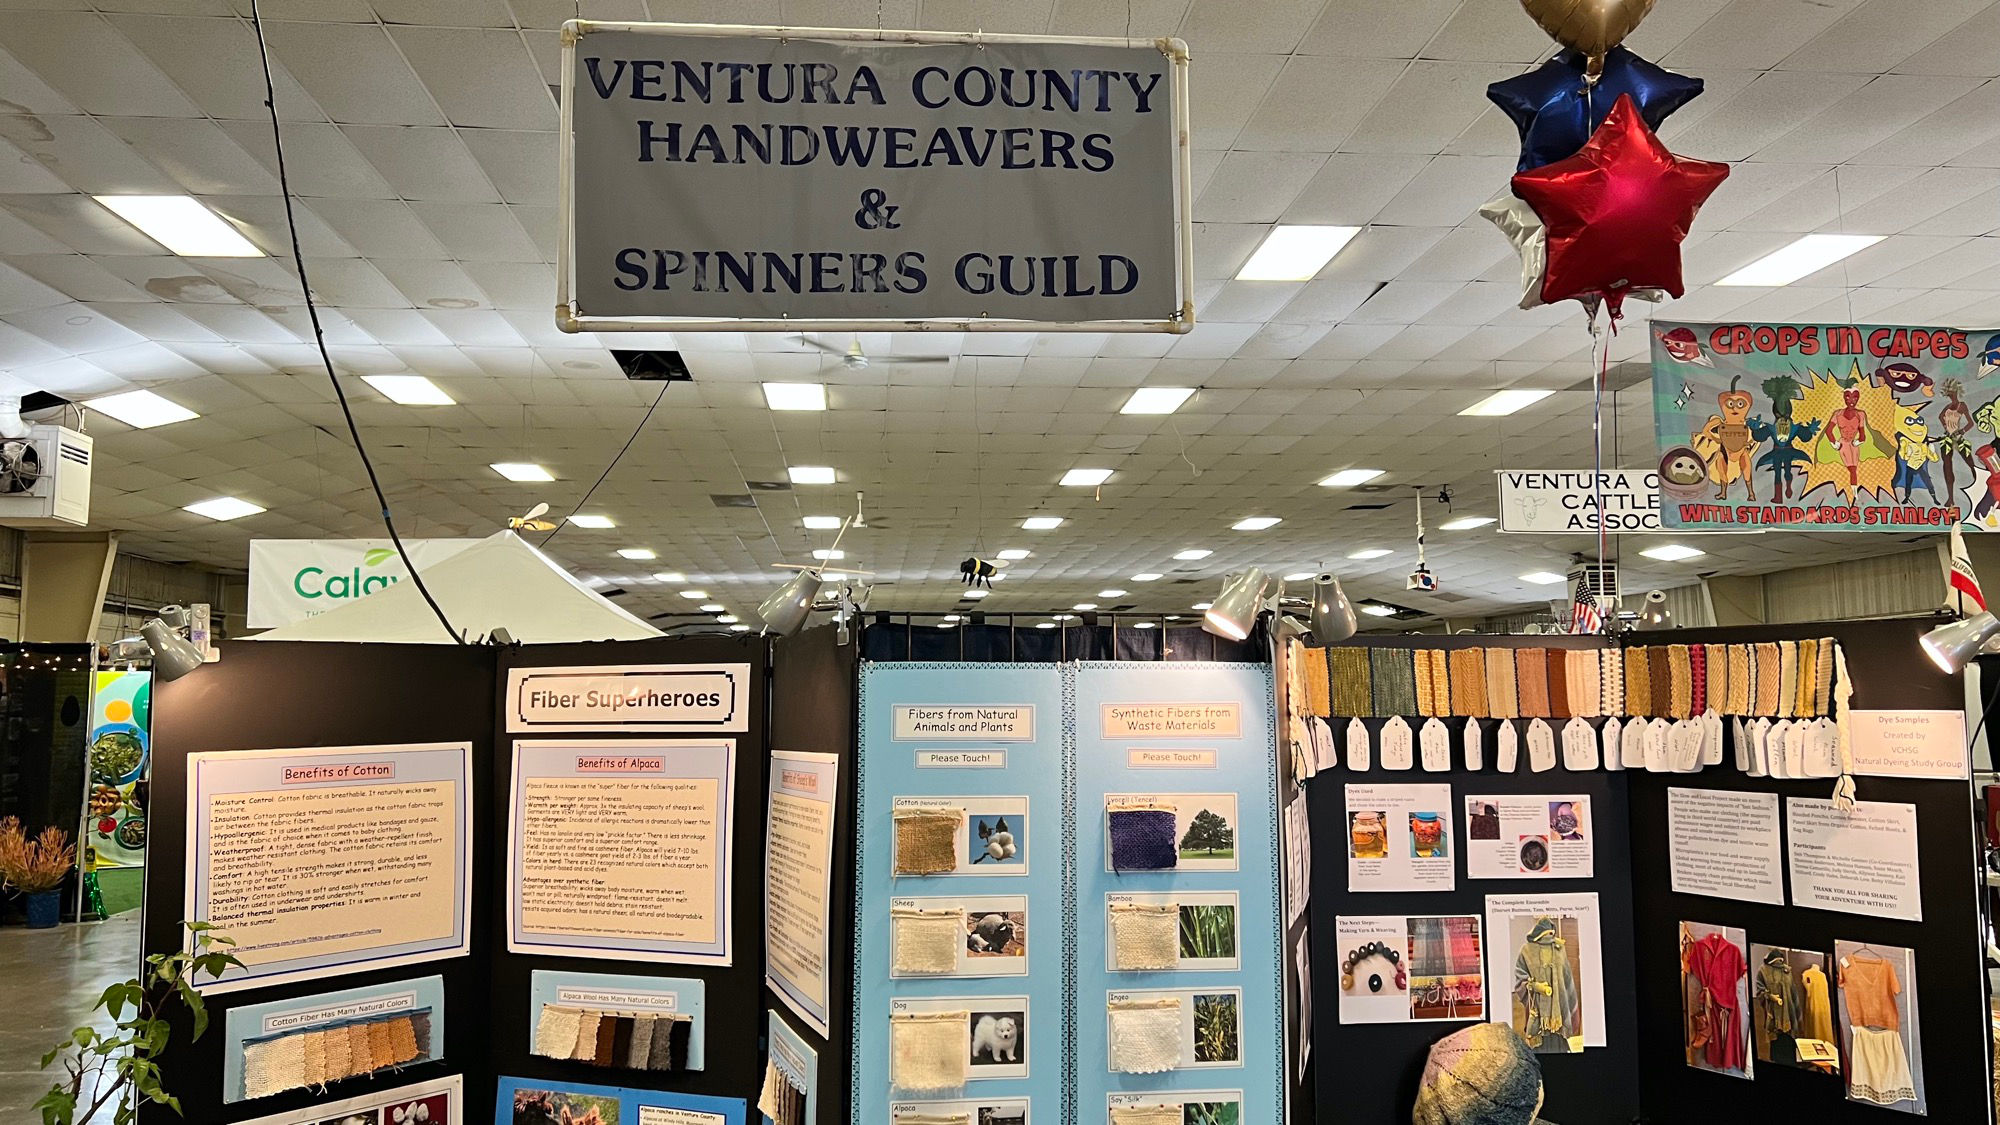 Agriculture Ventura Handweavers & Spinners Guild